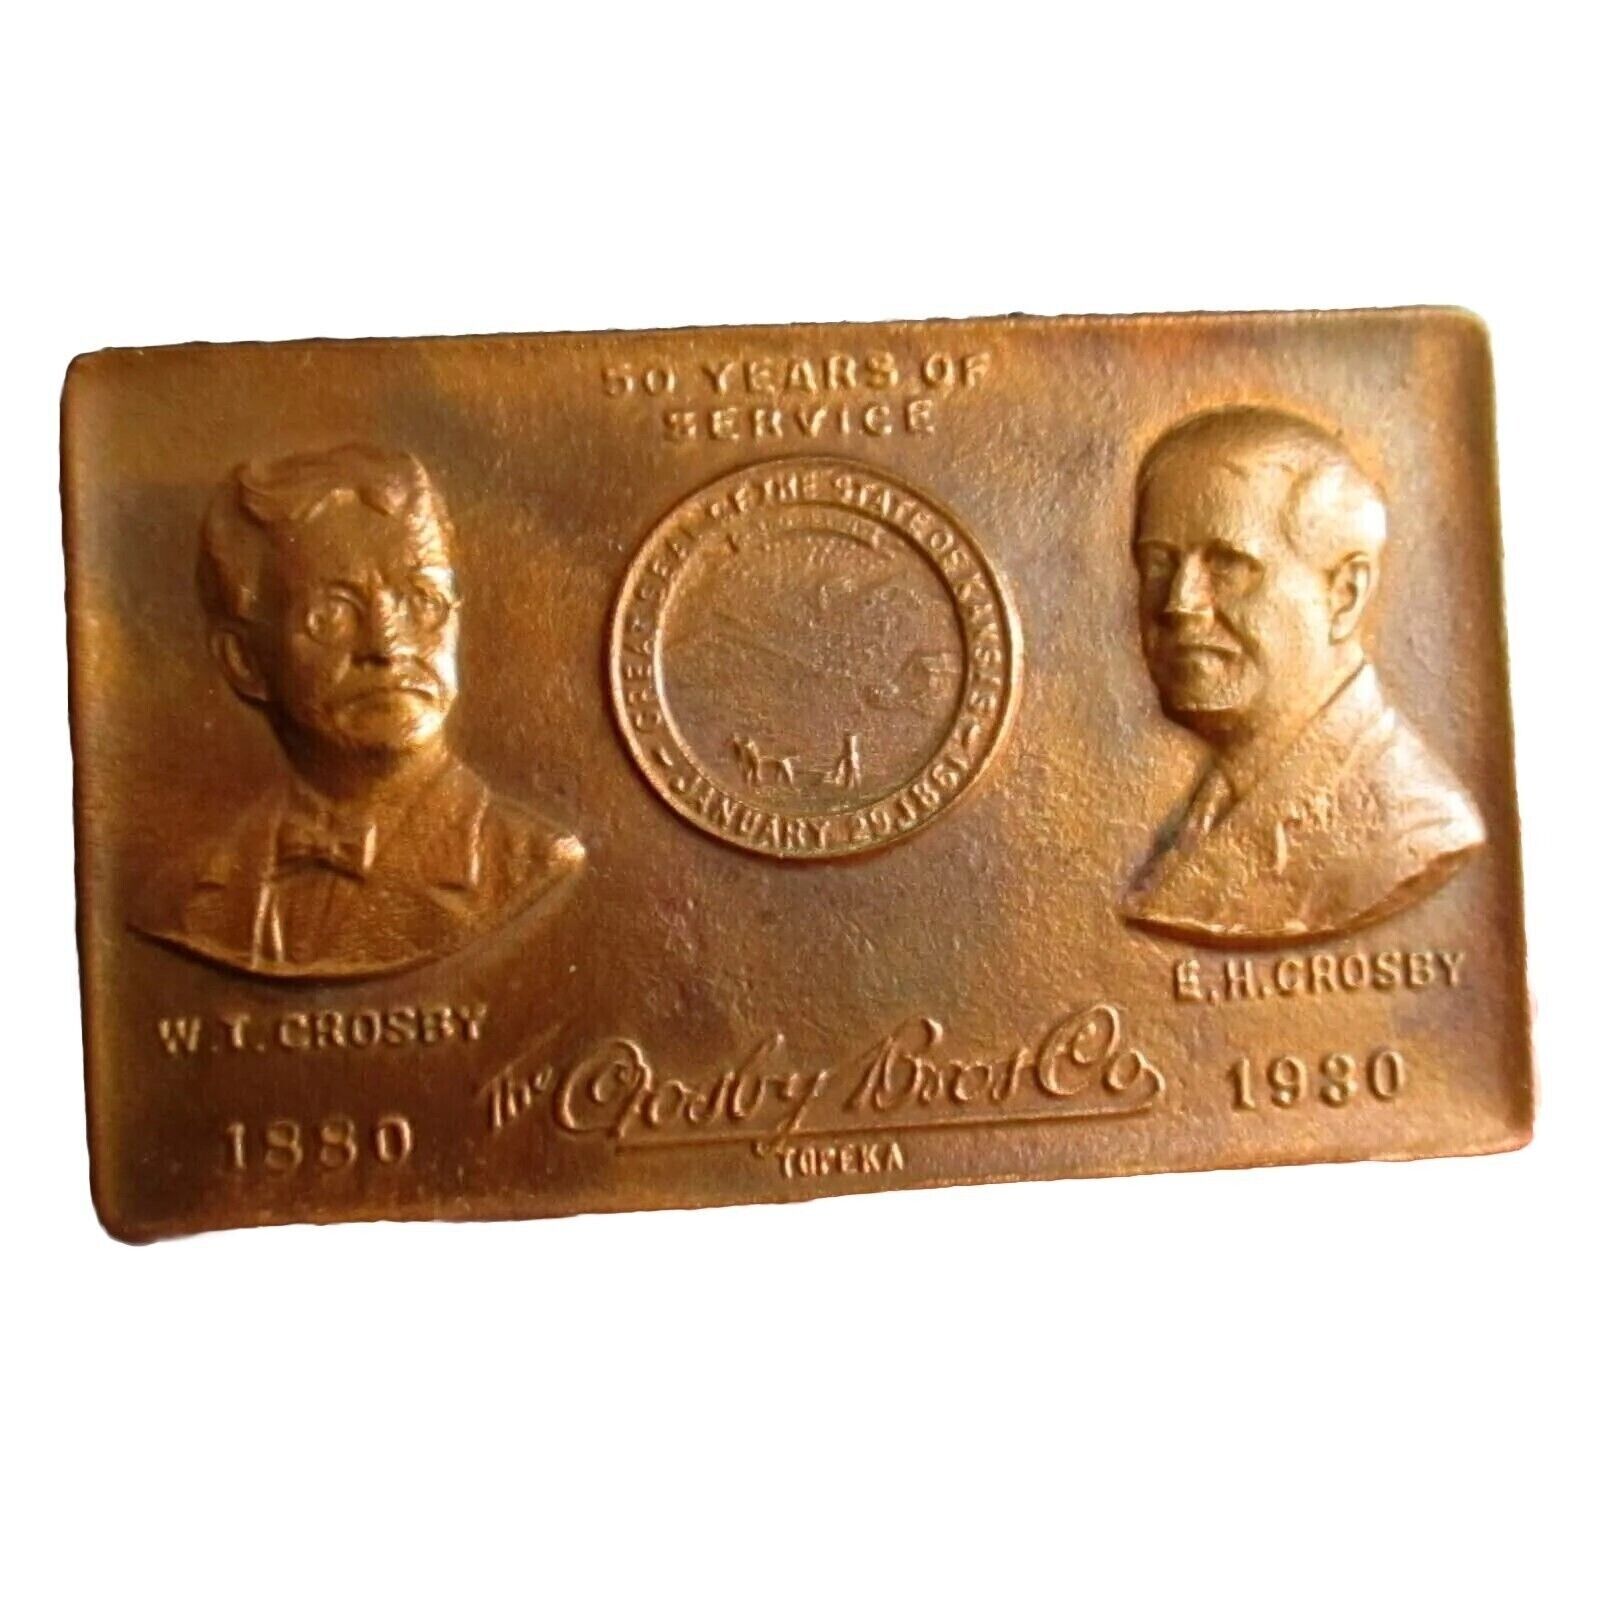 The Crosby Bros. Co. Topeka, Kansas embossed Copper  \